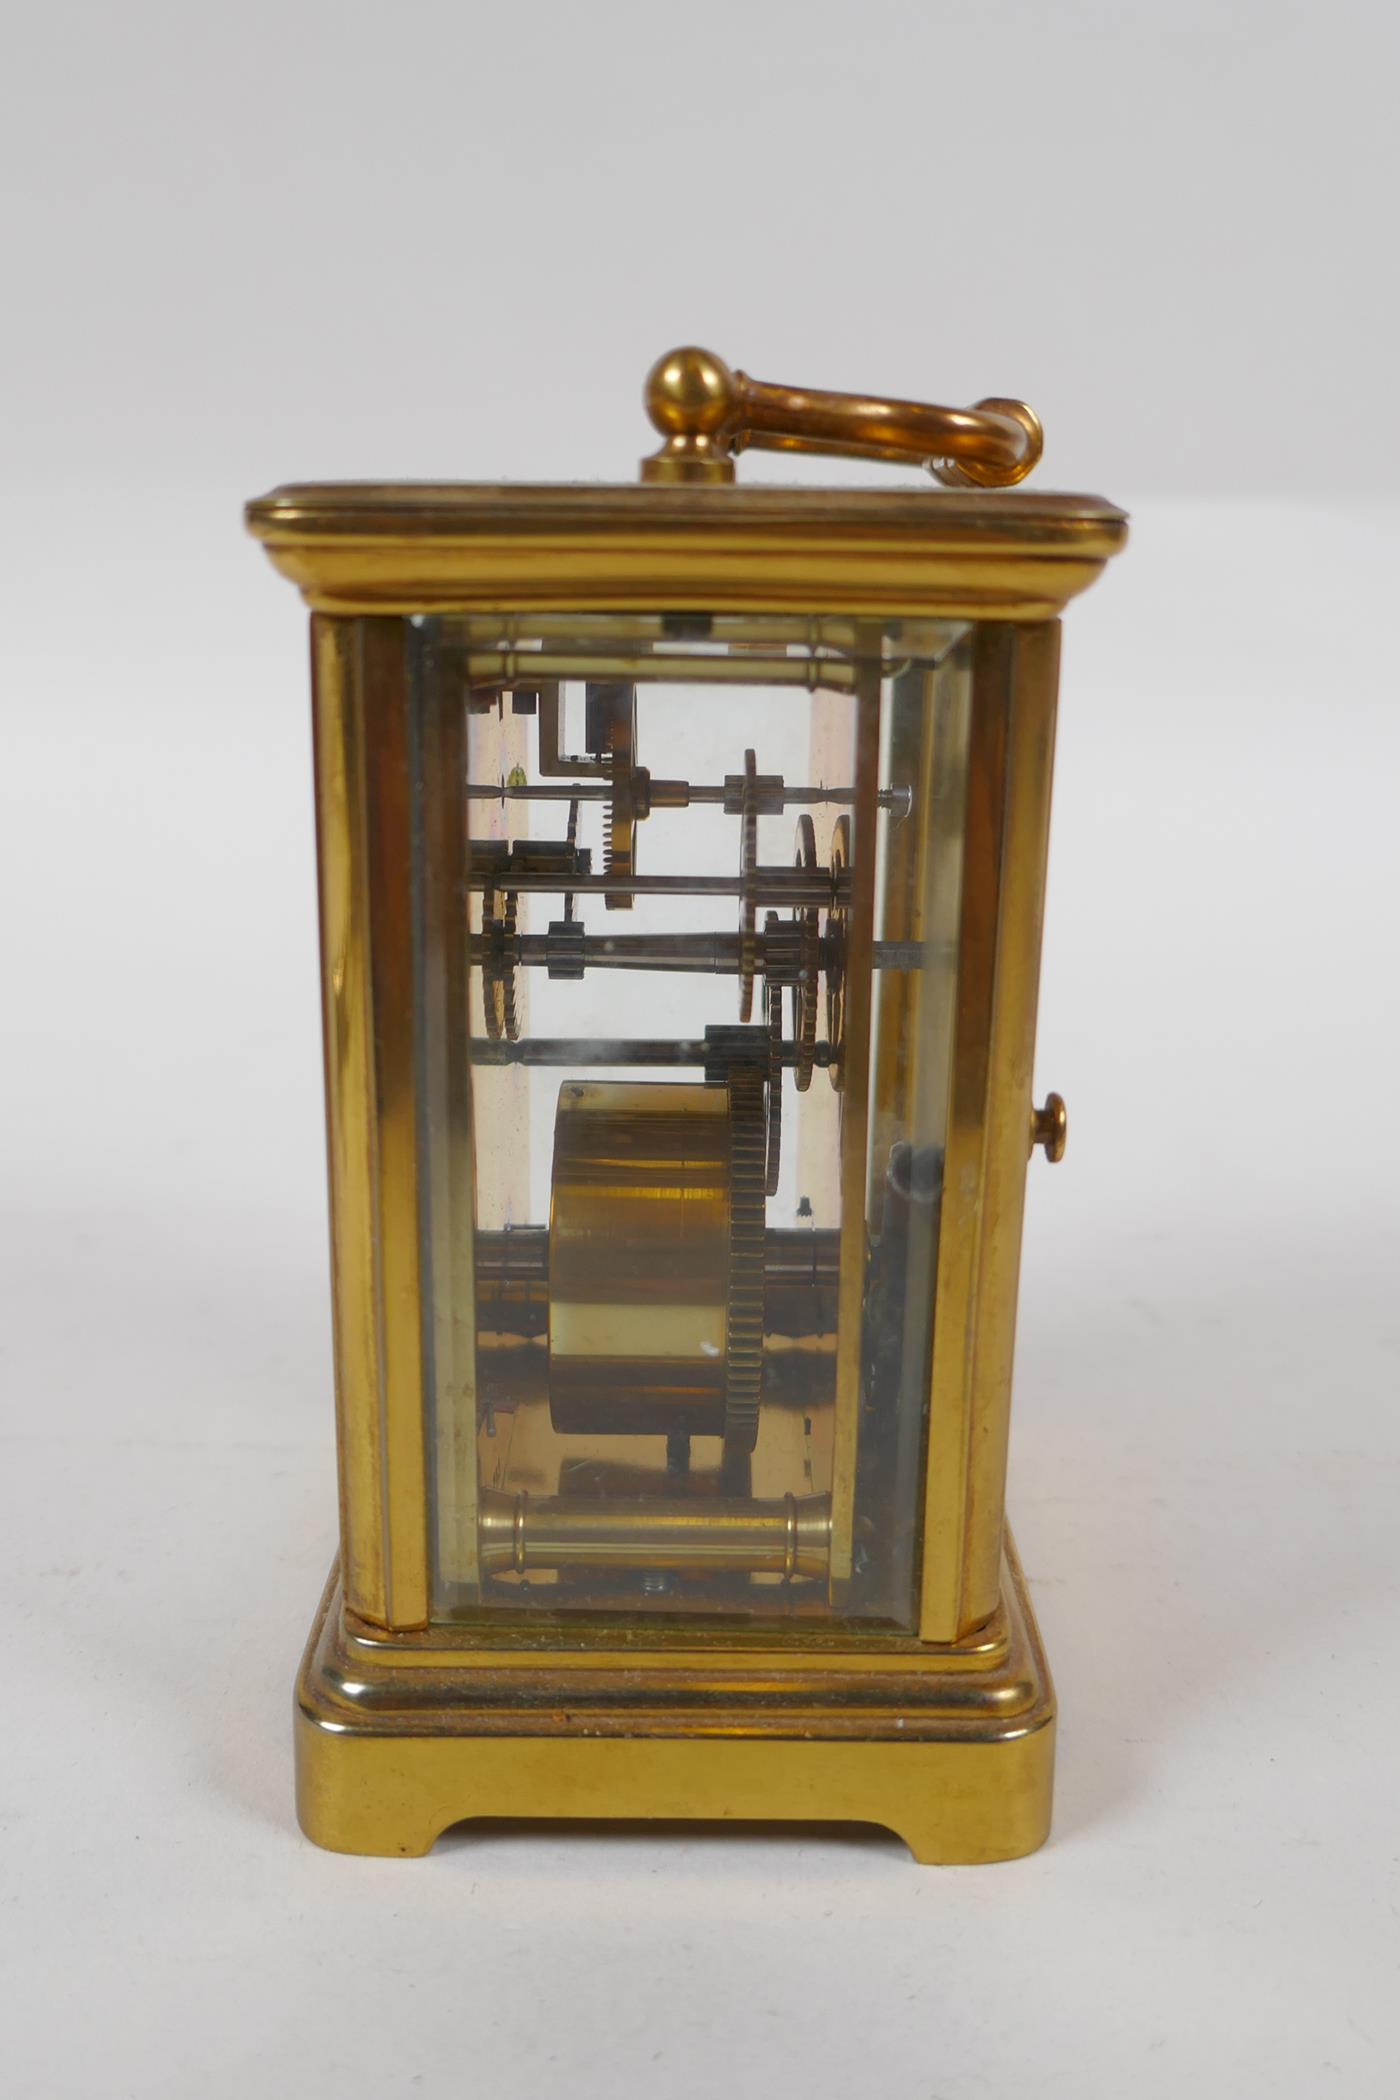 A brass cased carriage clock, the enamel dial with Roman numerals, 8 x 6cm, 11cm high - Image 4 of 4